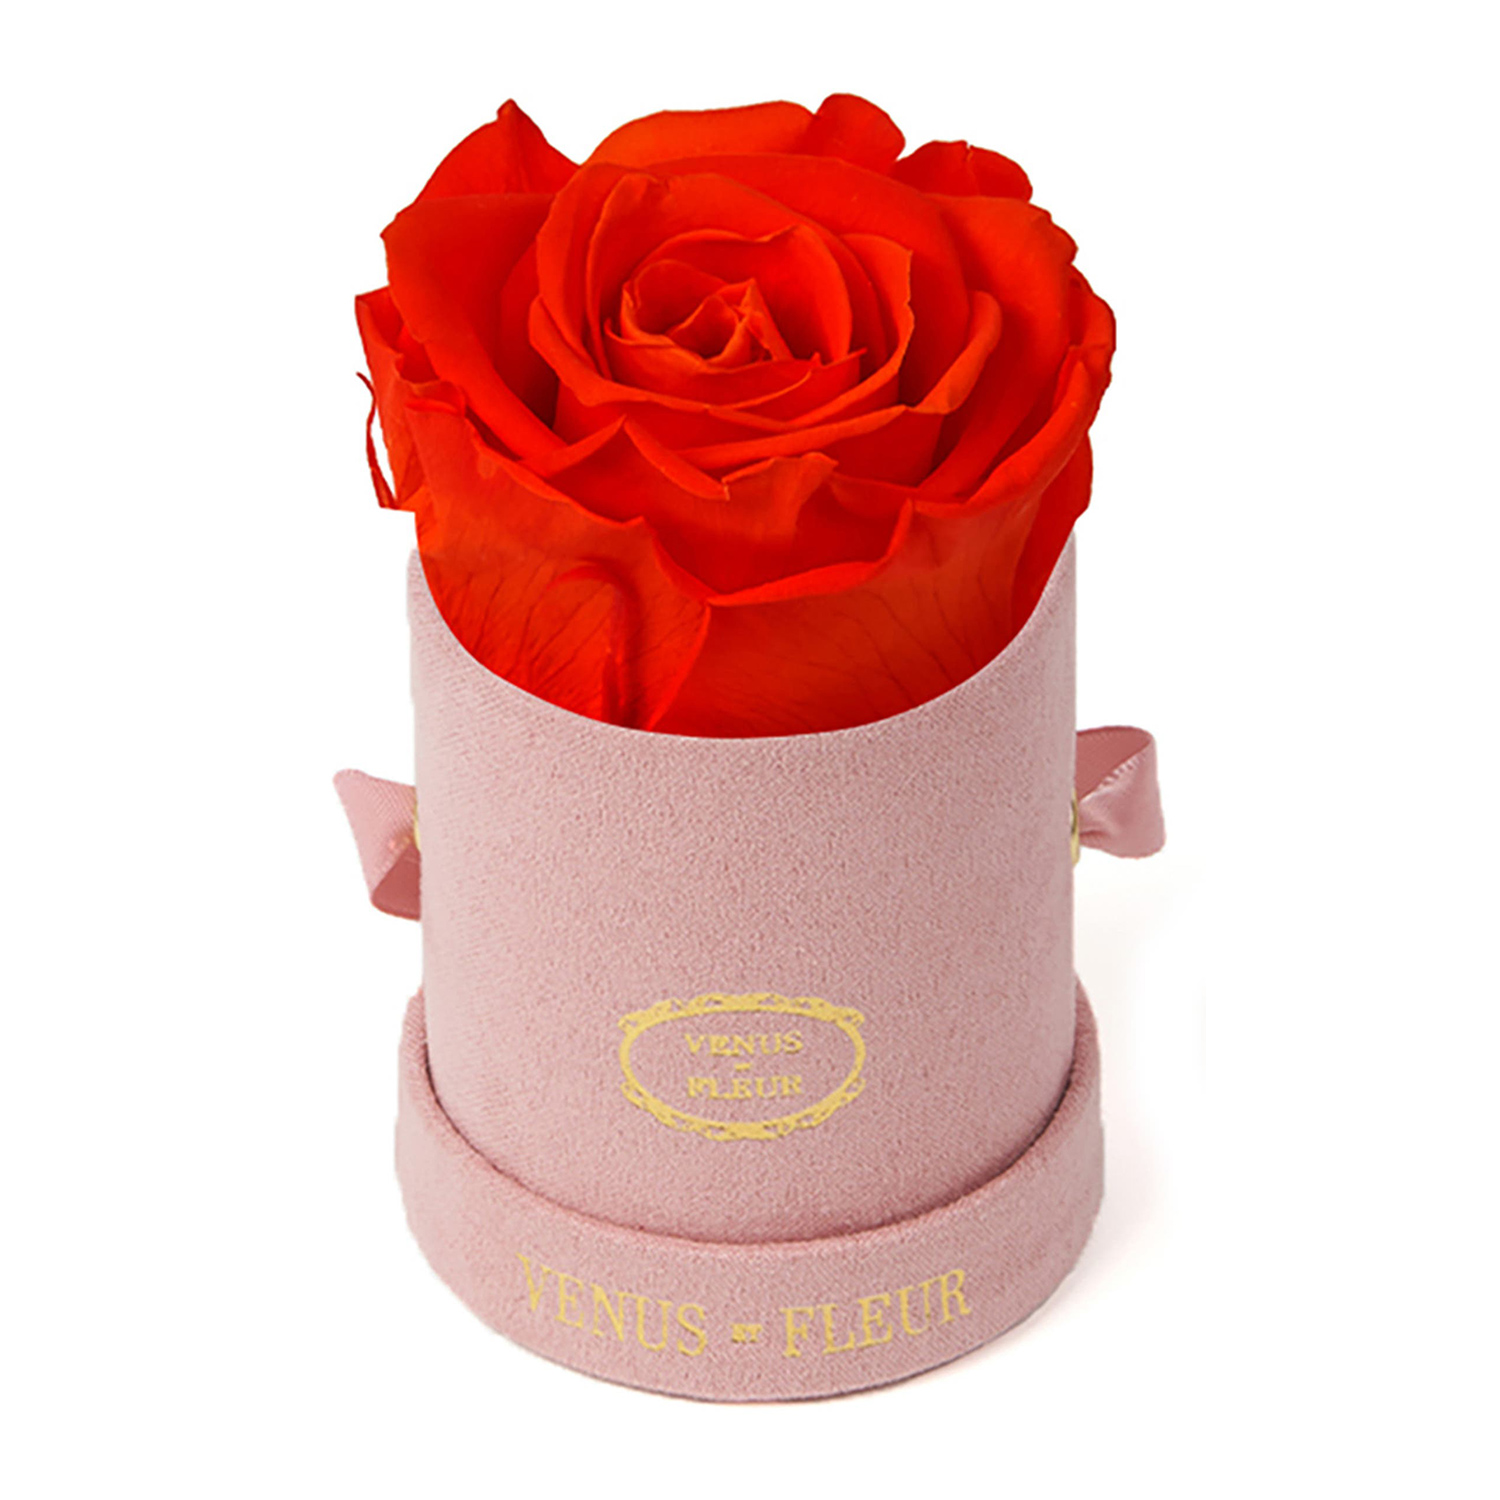 le mini round, red rose meaning